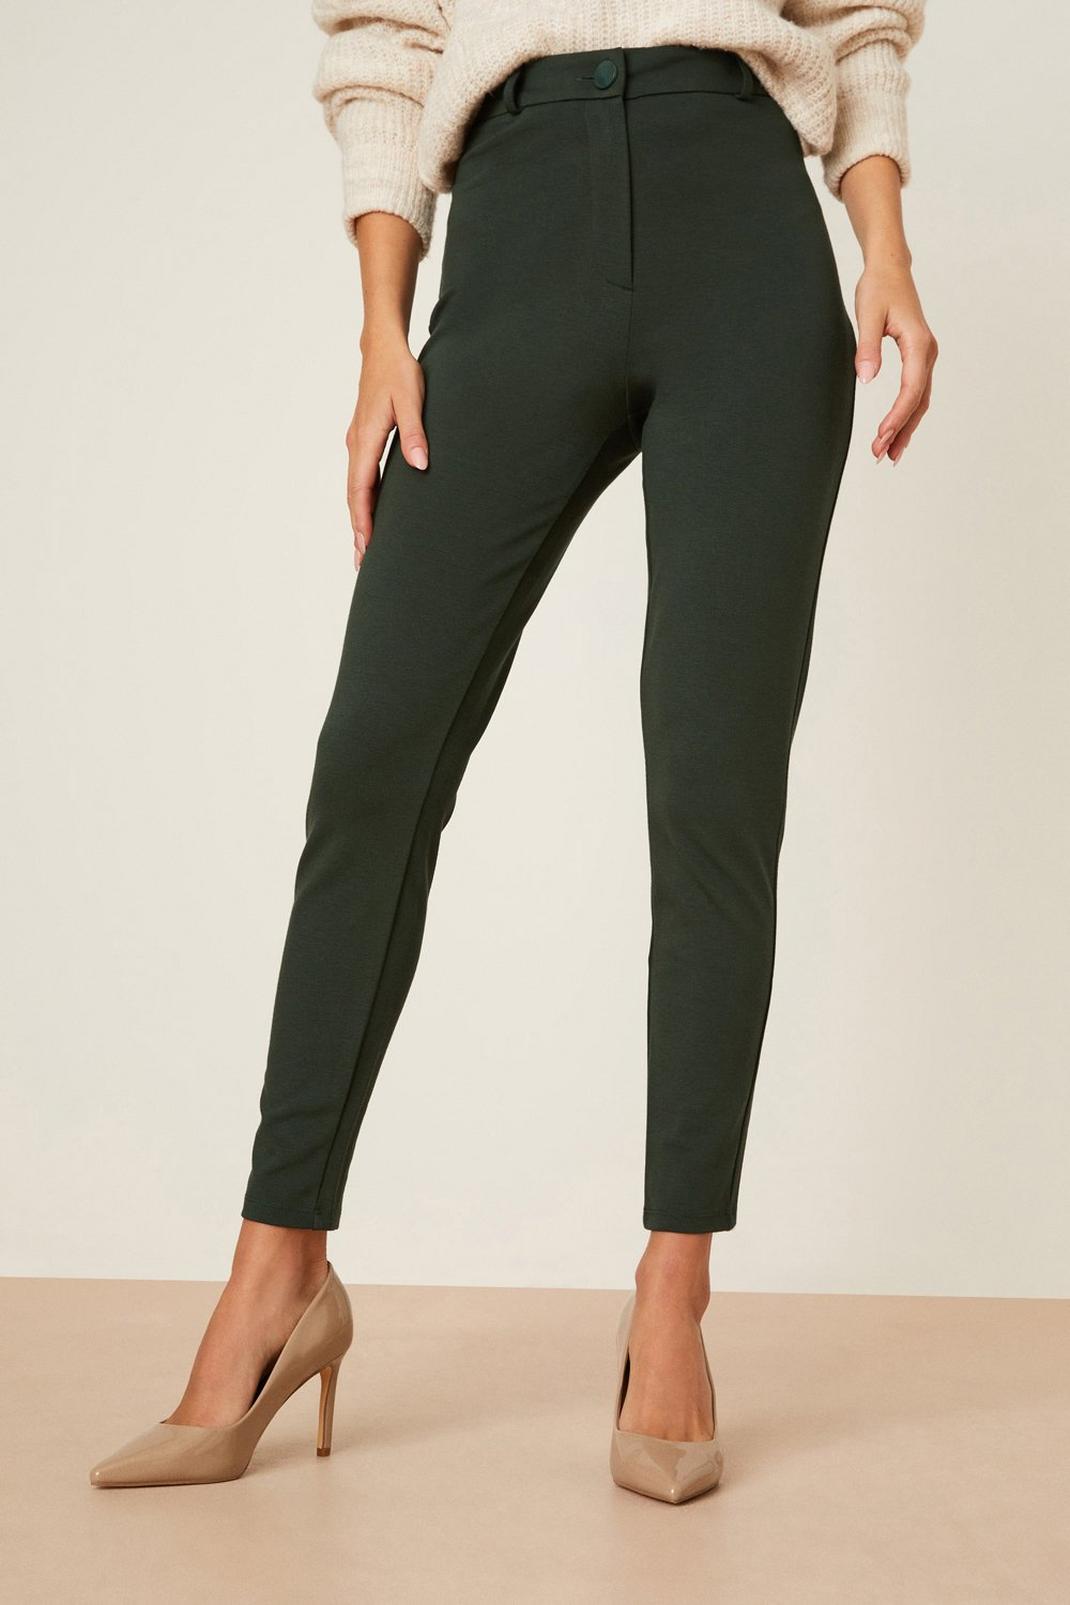 Forest Petite High Waist Compact Ponte Legging image number 1